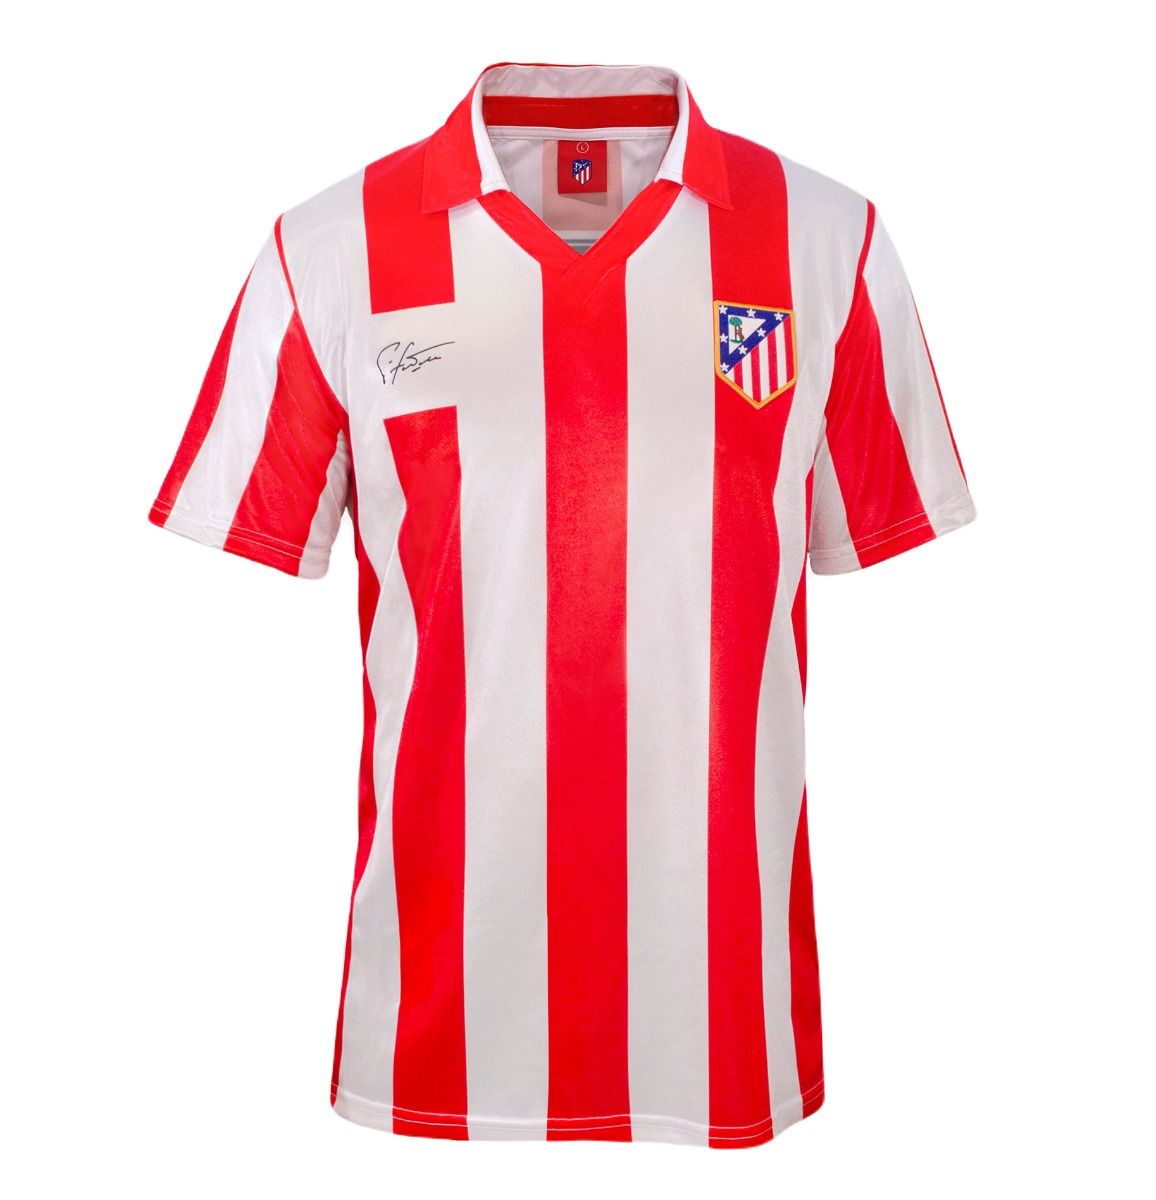 FUTRE HOME 87/88 JERSEY image number null